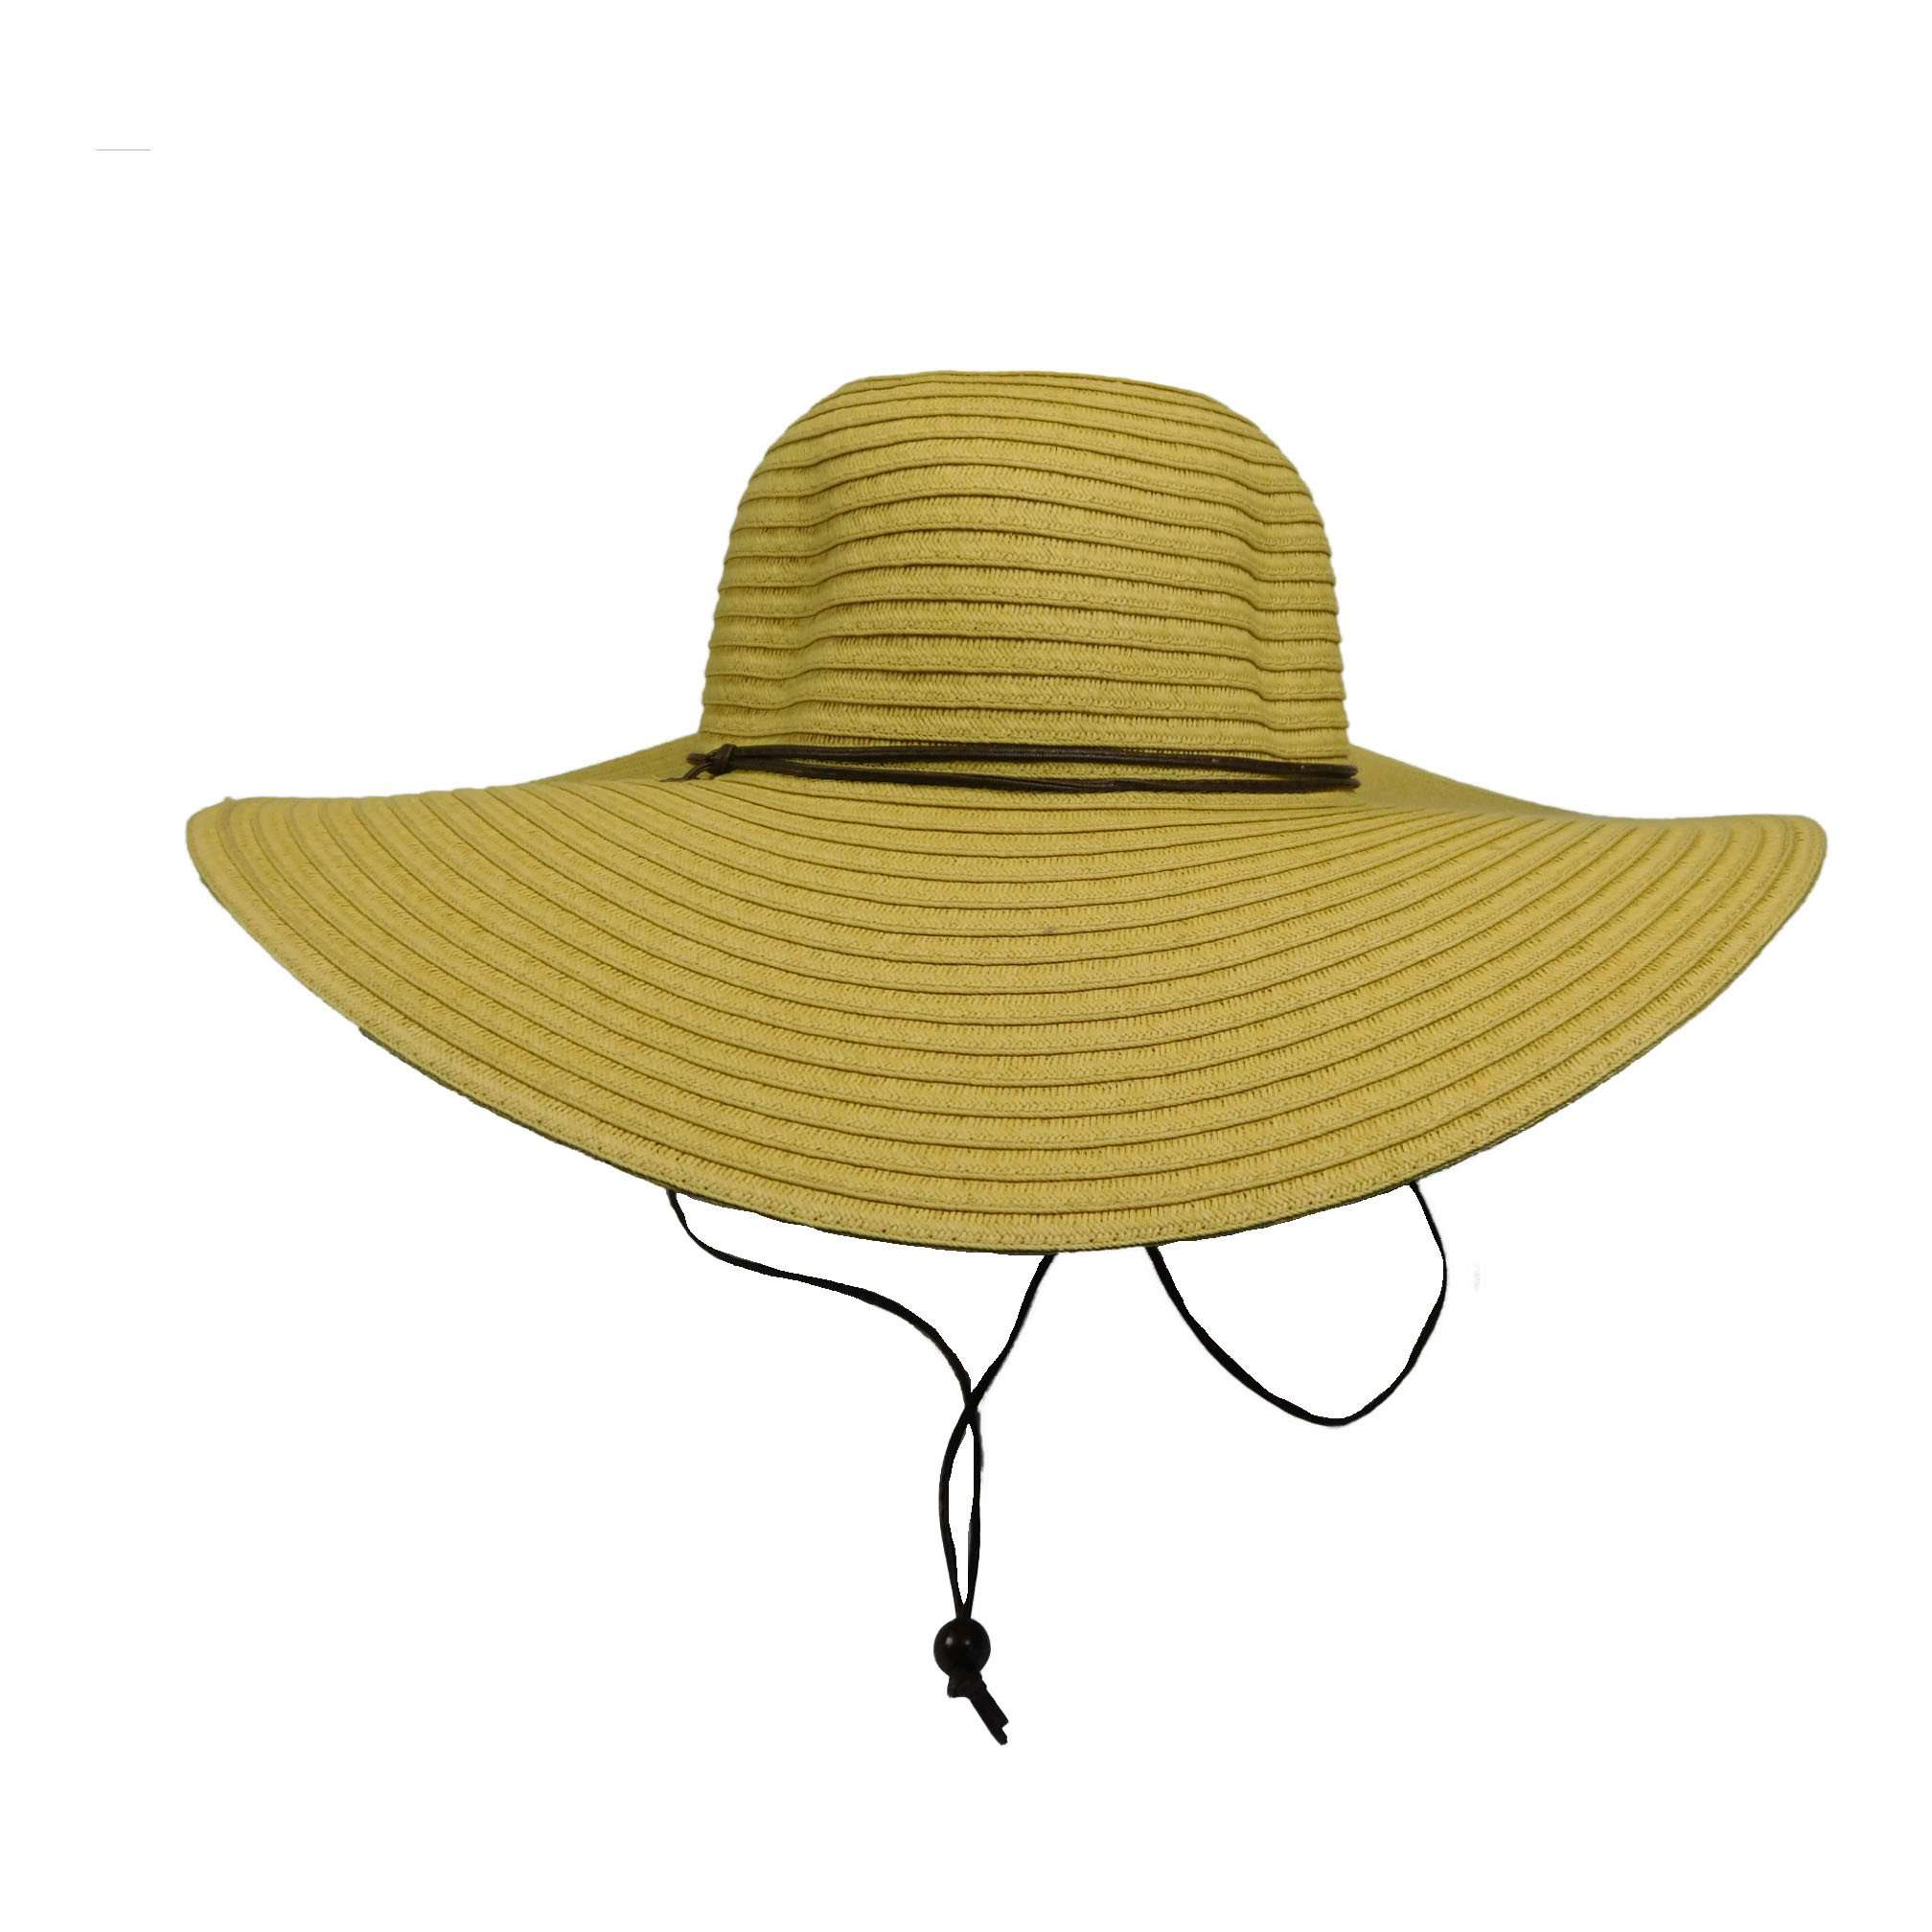 Tropical Trends Wide Brim Sun Hat with Chin Cord Wide Brim Sun Hat Dorfman Hat Co. lt122nt Natural  